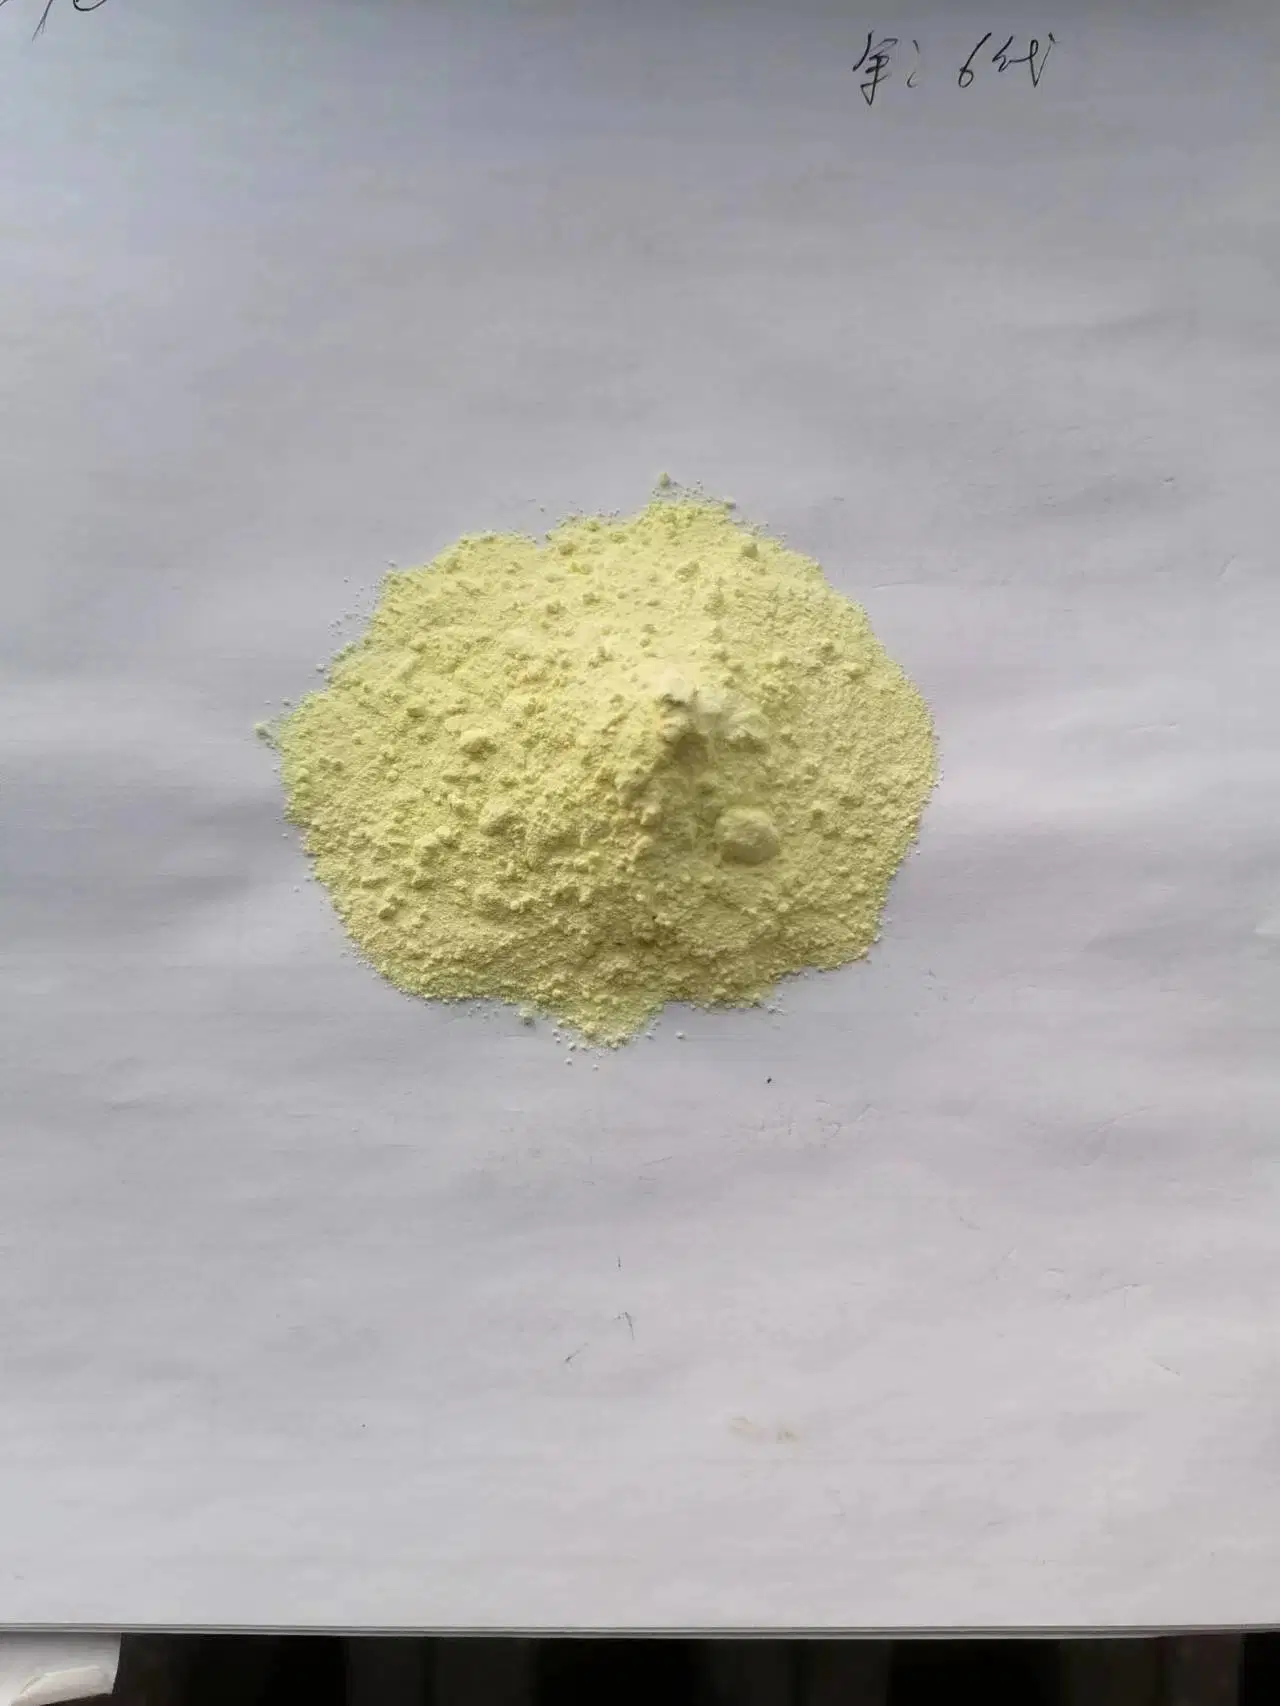 Cerium Oxide 99.99% Purity by Express FedEx Delivery with Retails Price